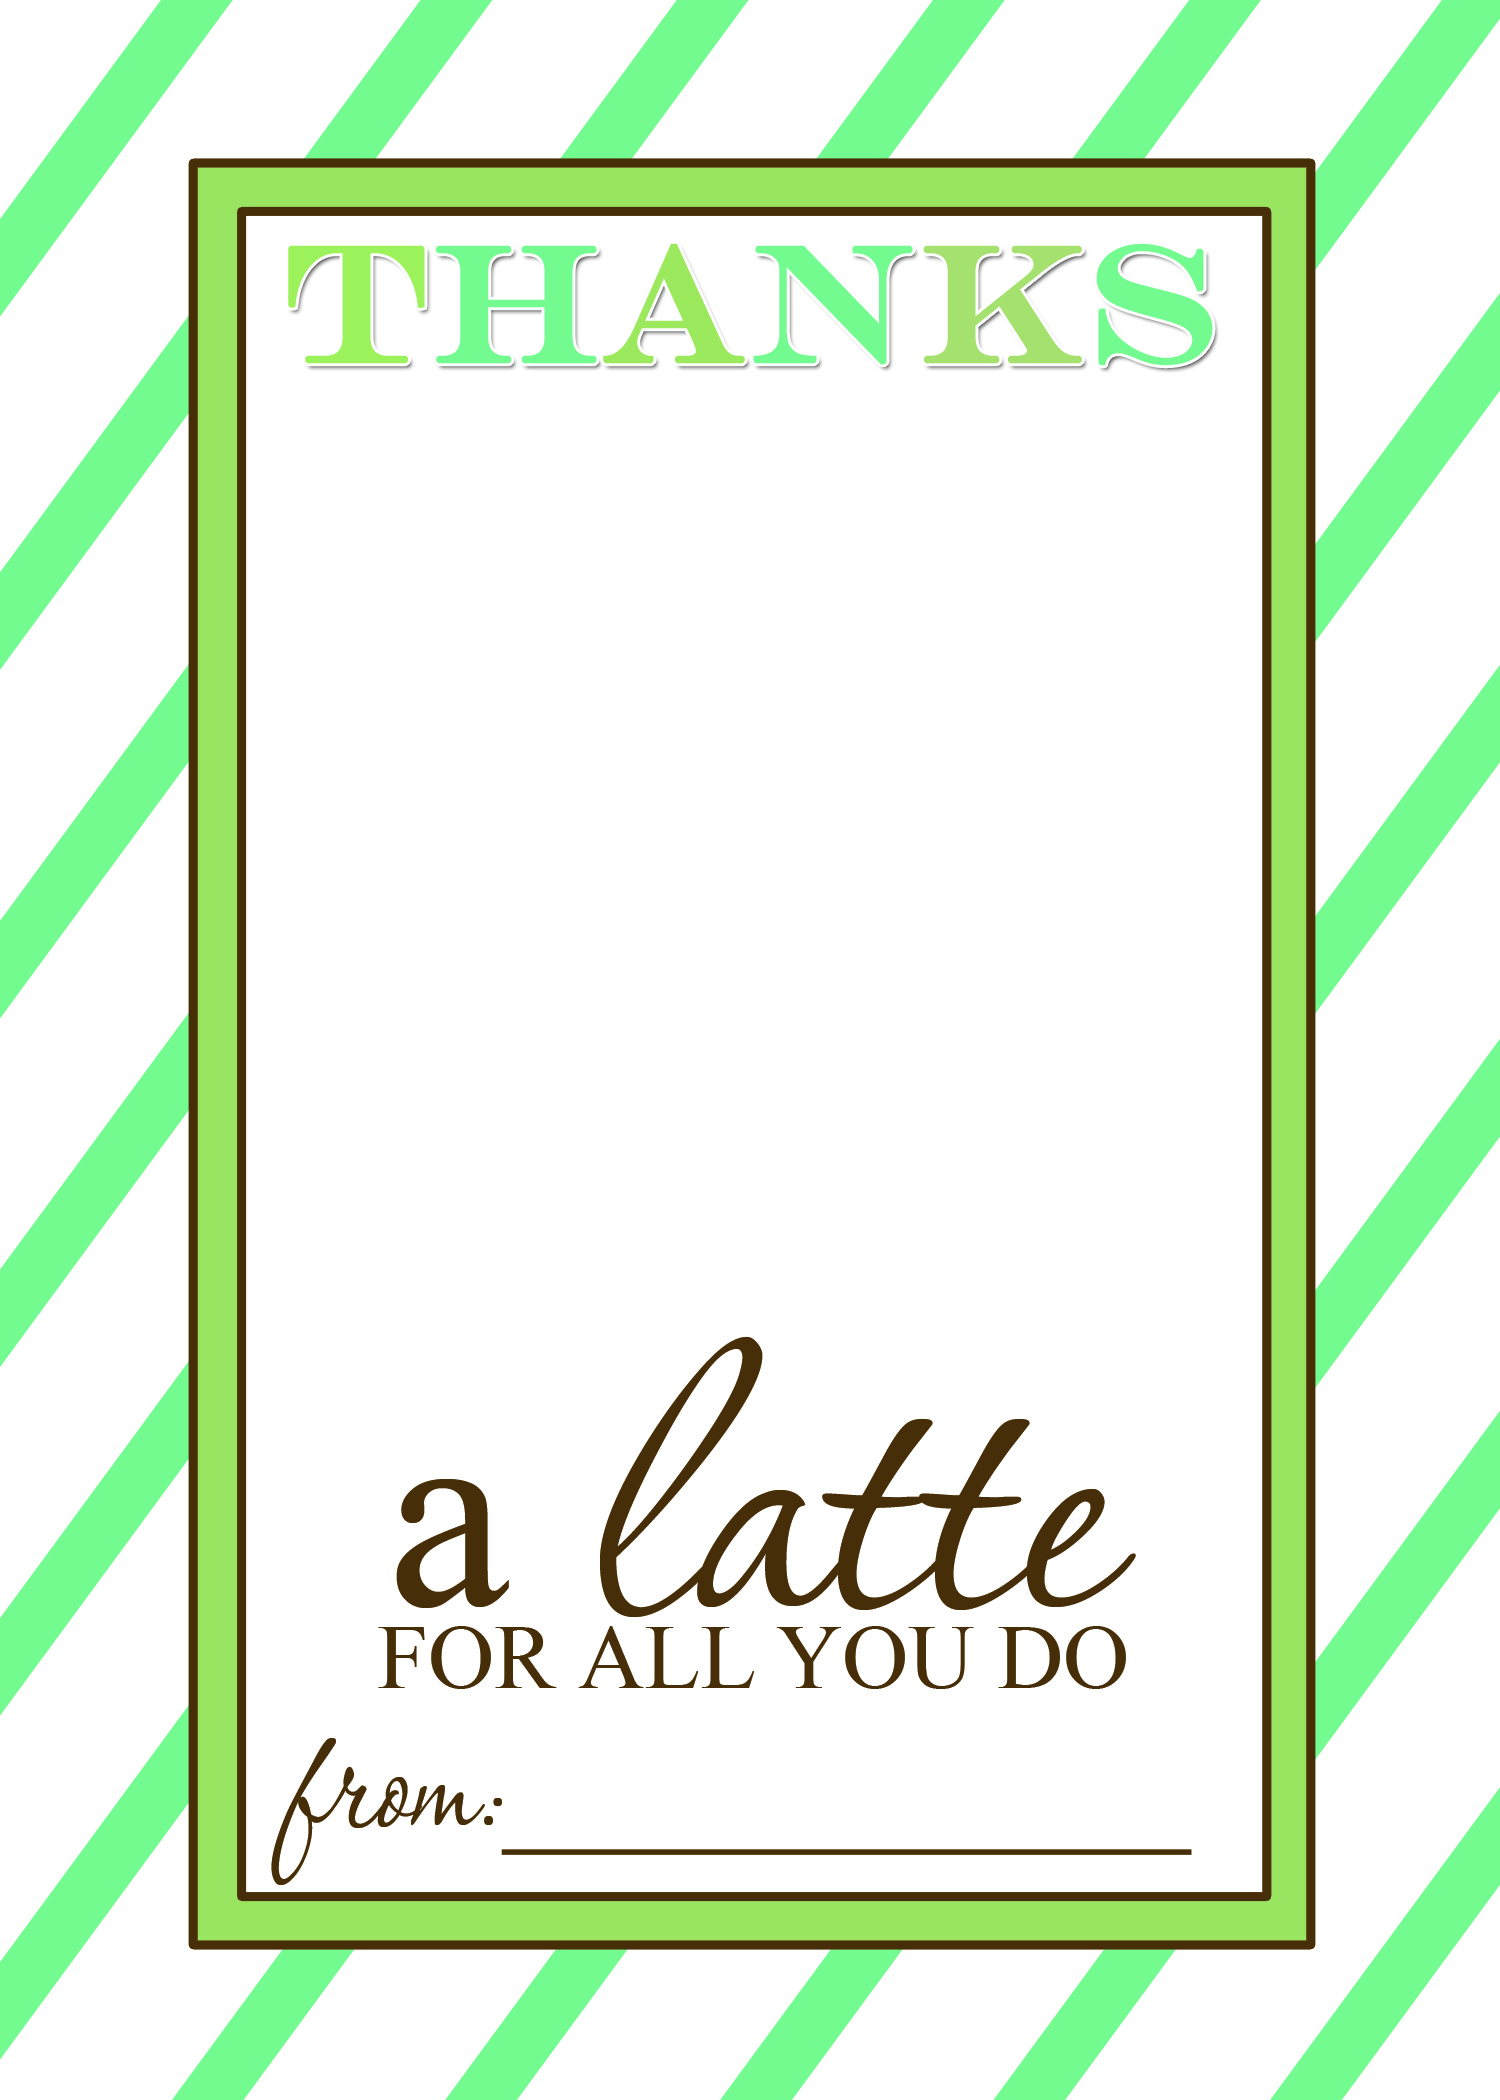 That's Country Living With Thanks A Latte Card Template